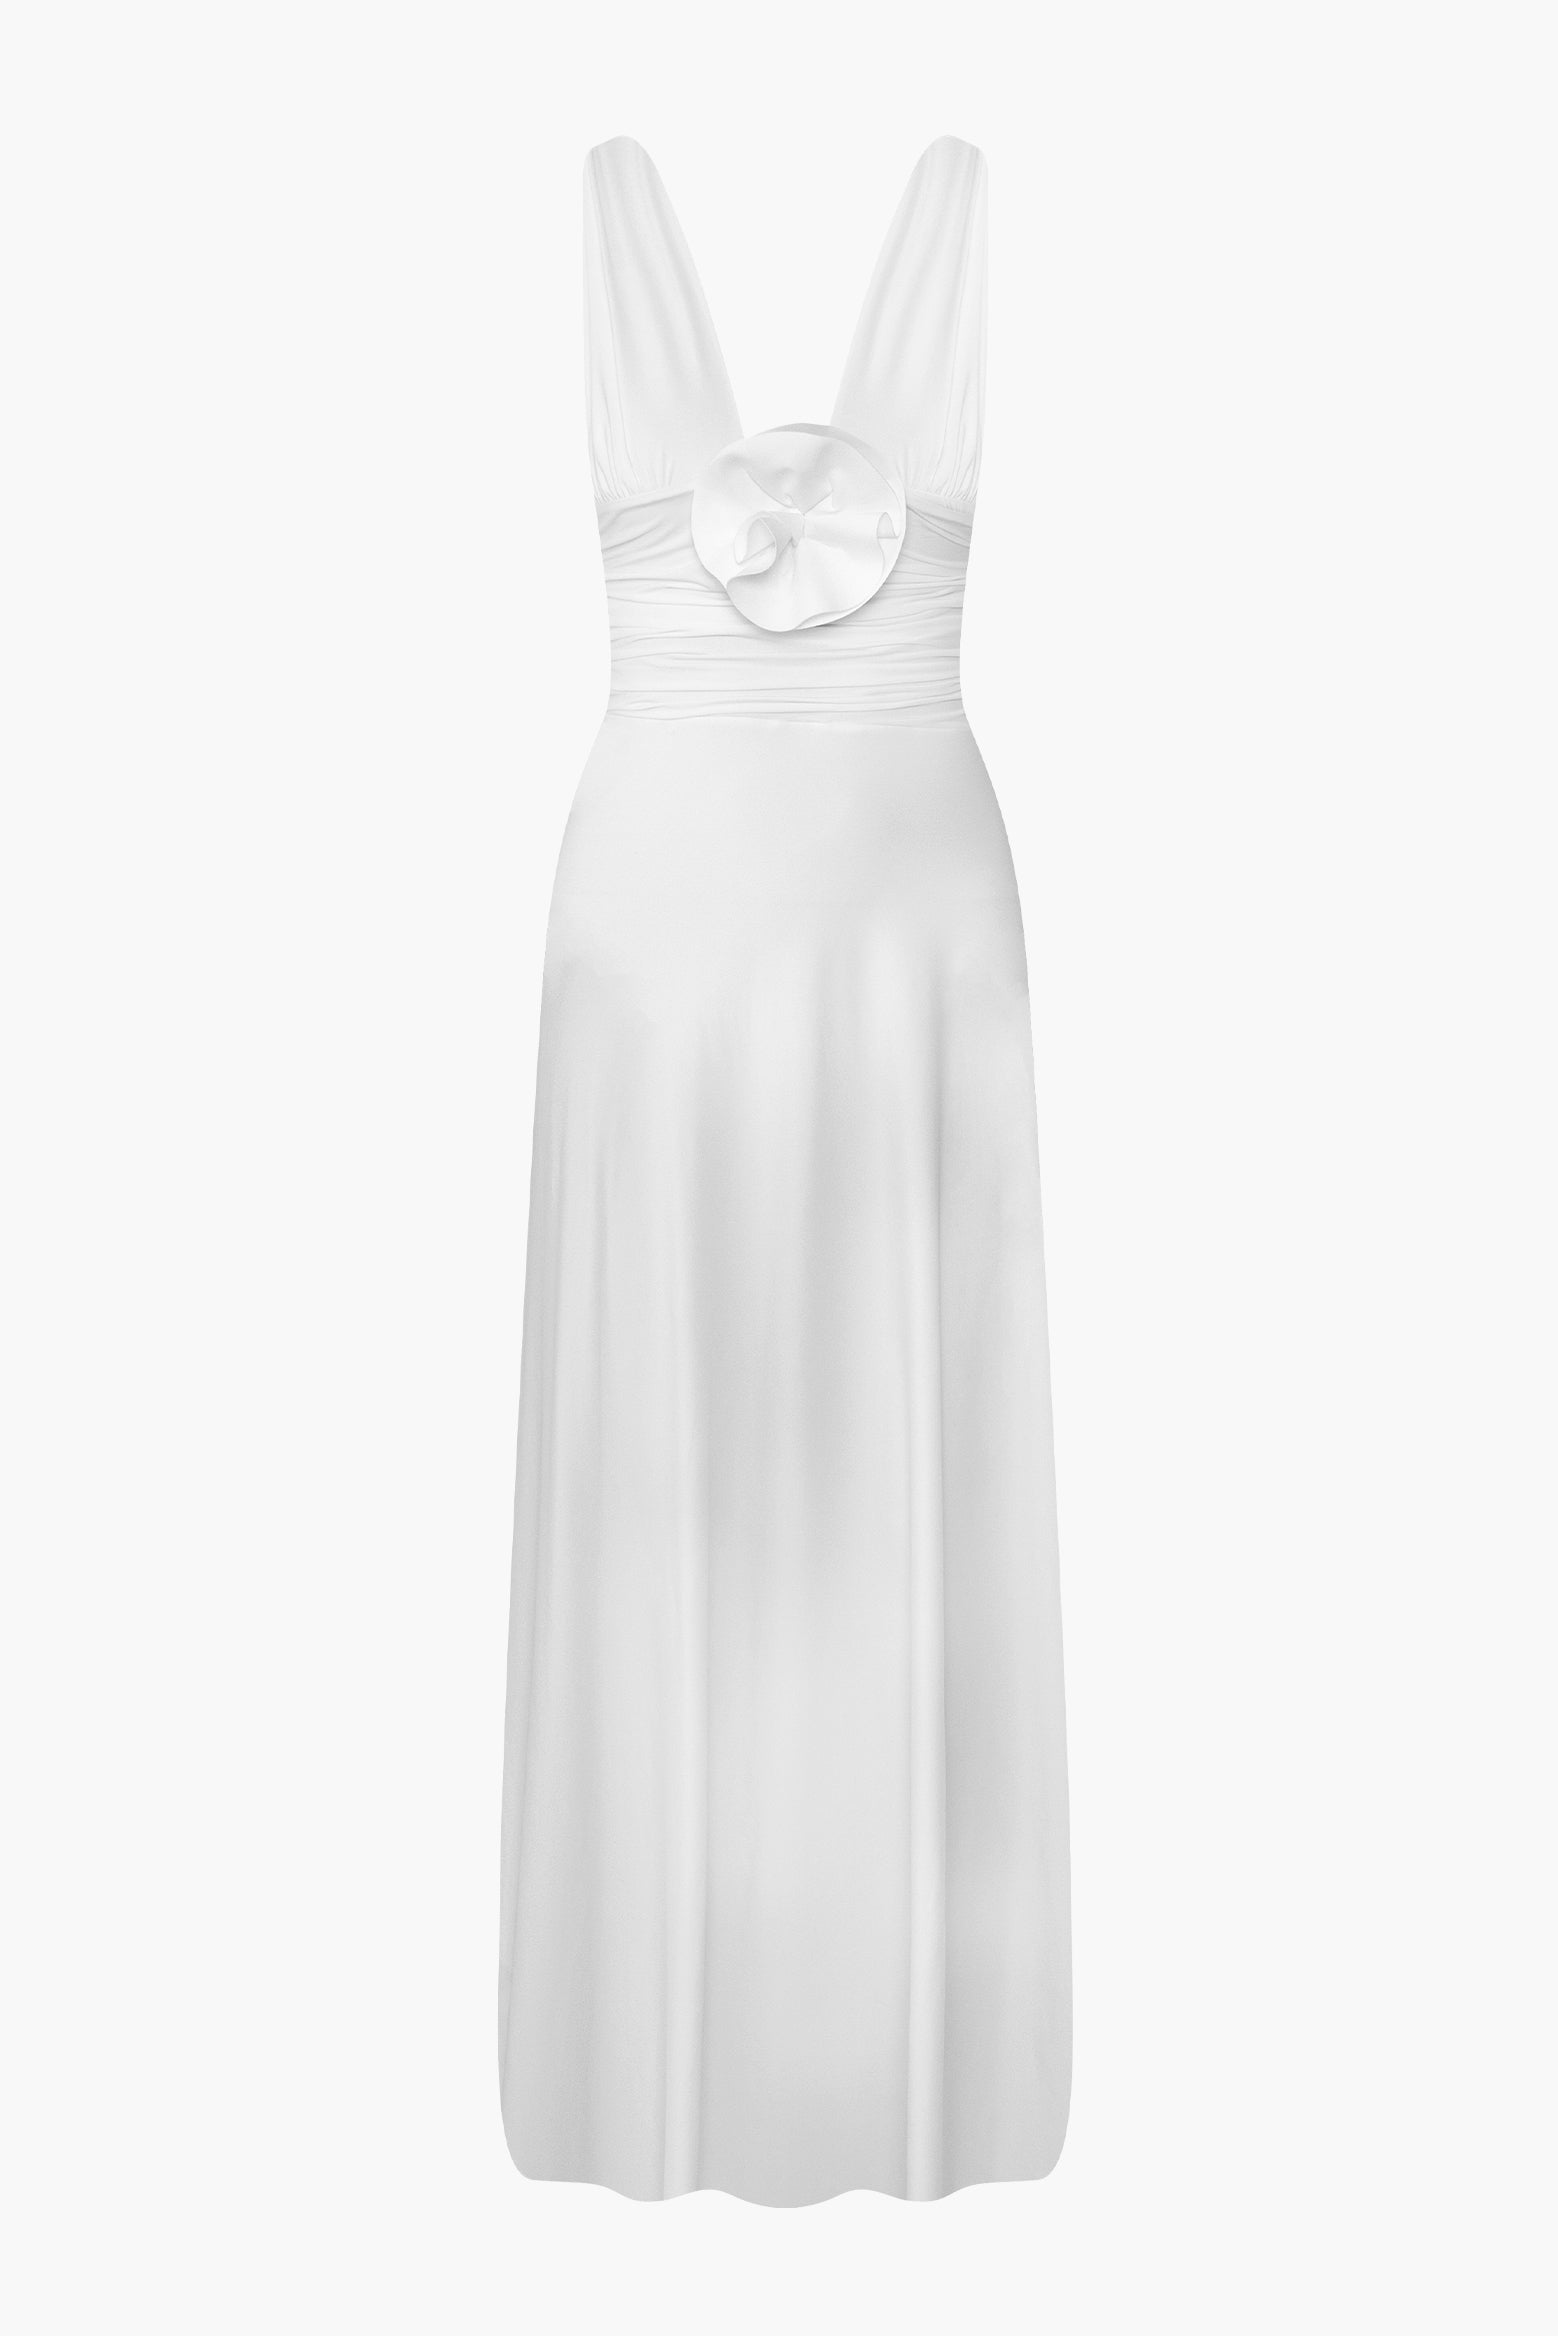 Maygel Coronel Orinoco Dress in Off White available at The New Trend Australia. 